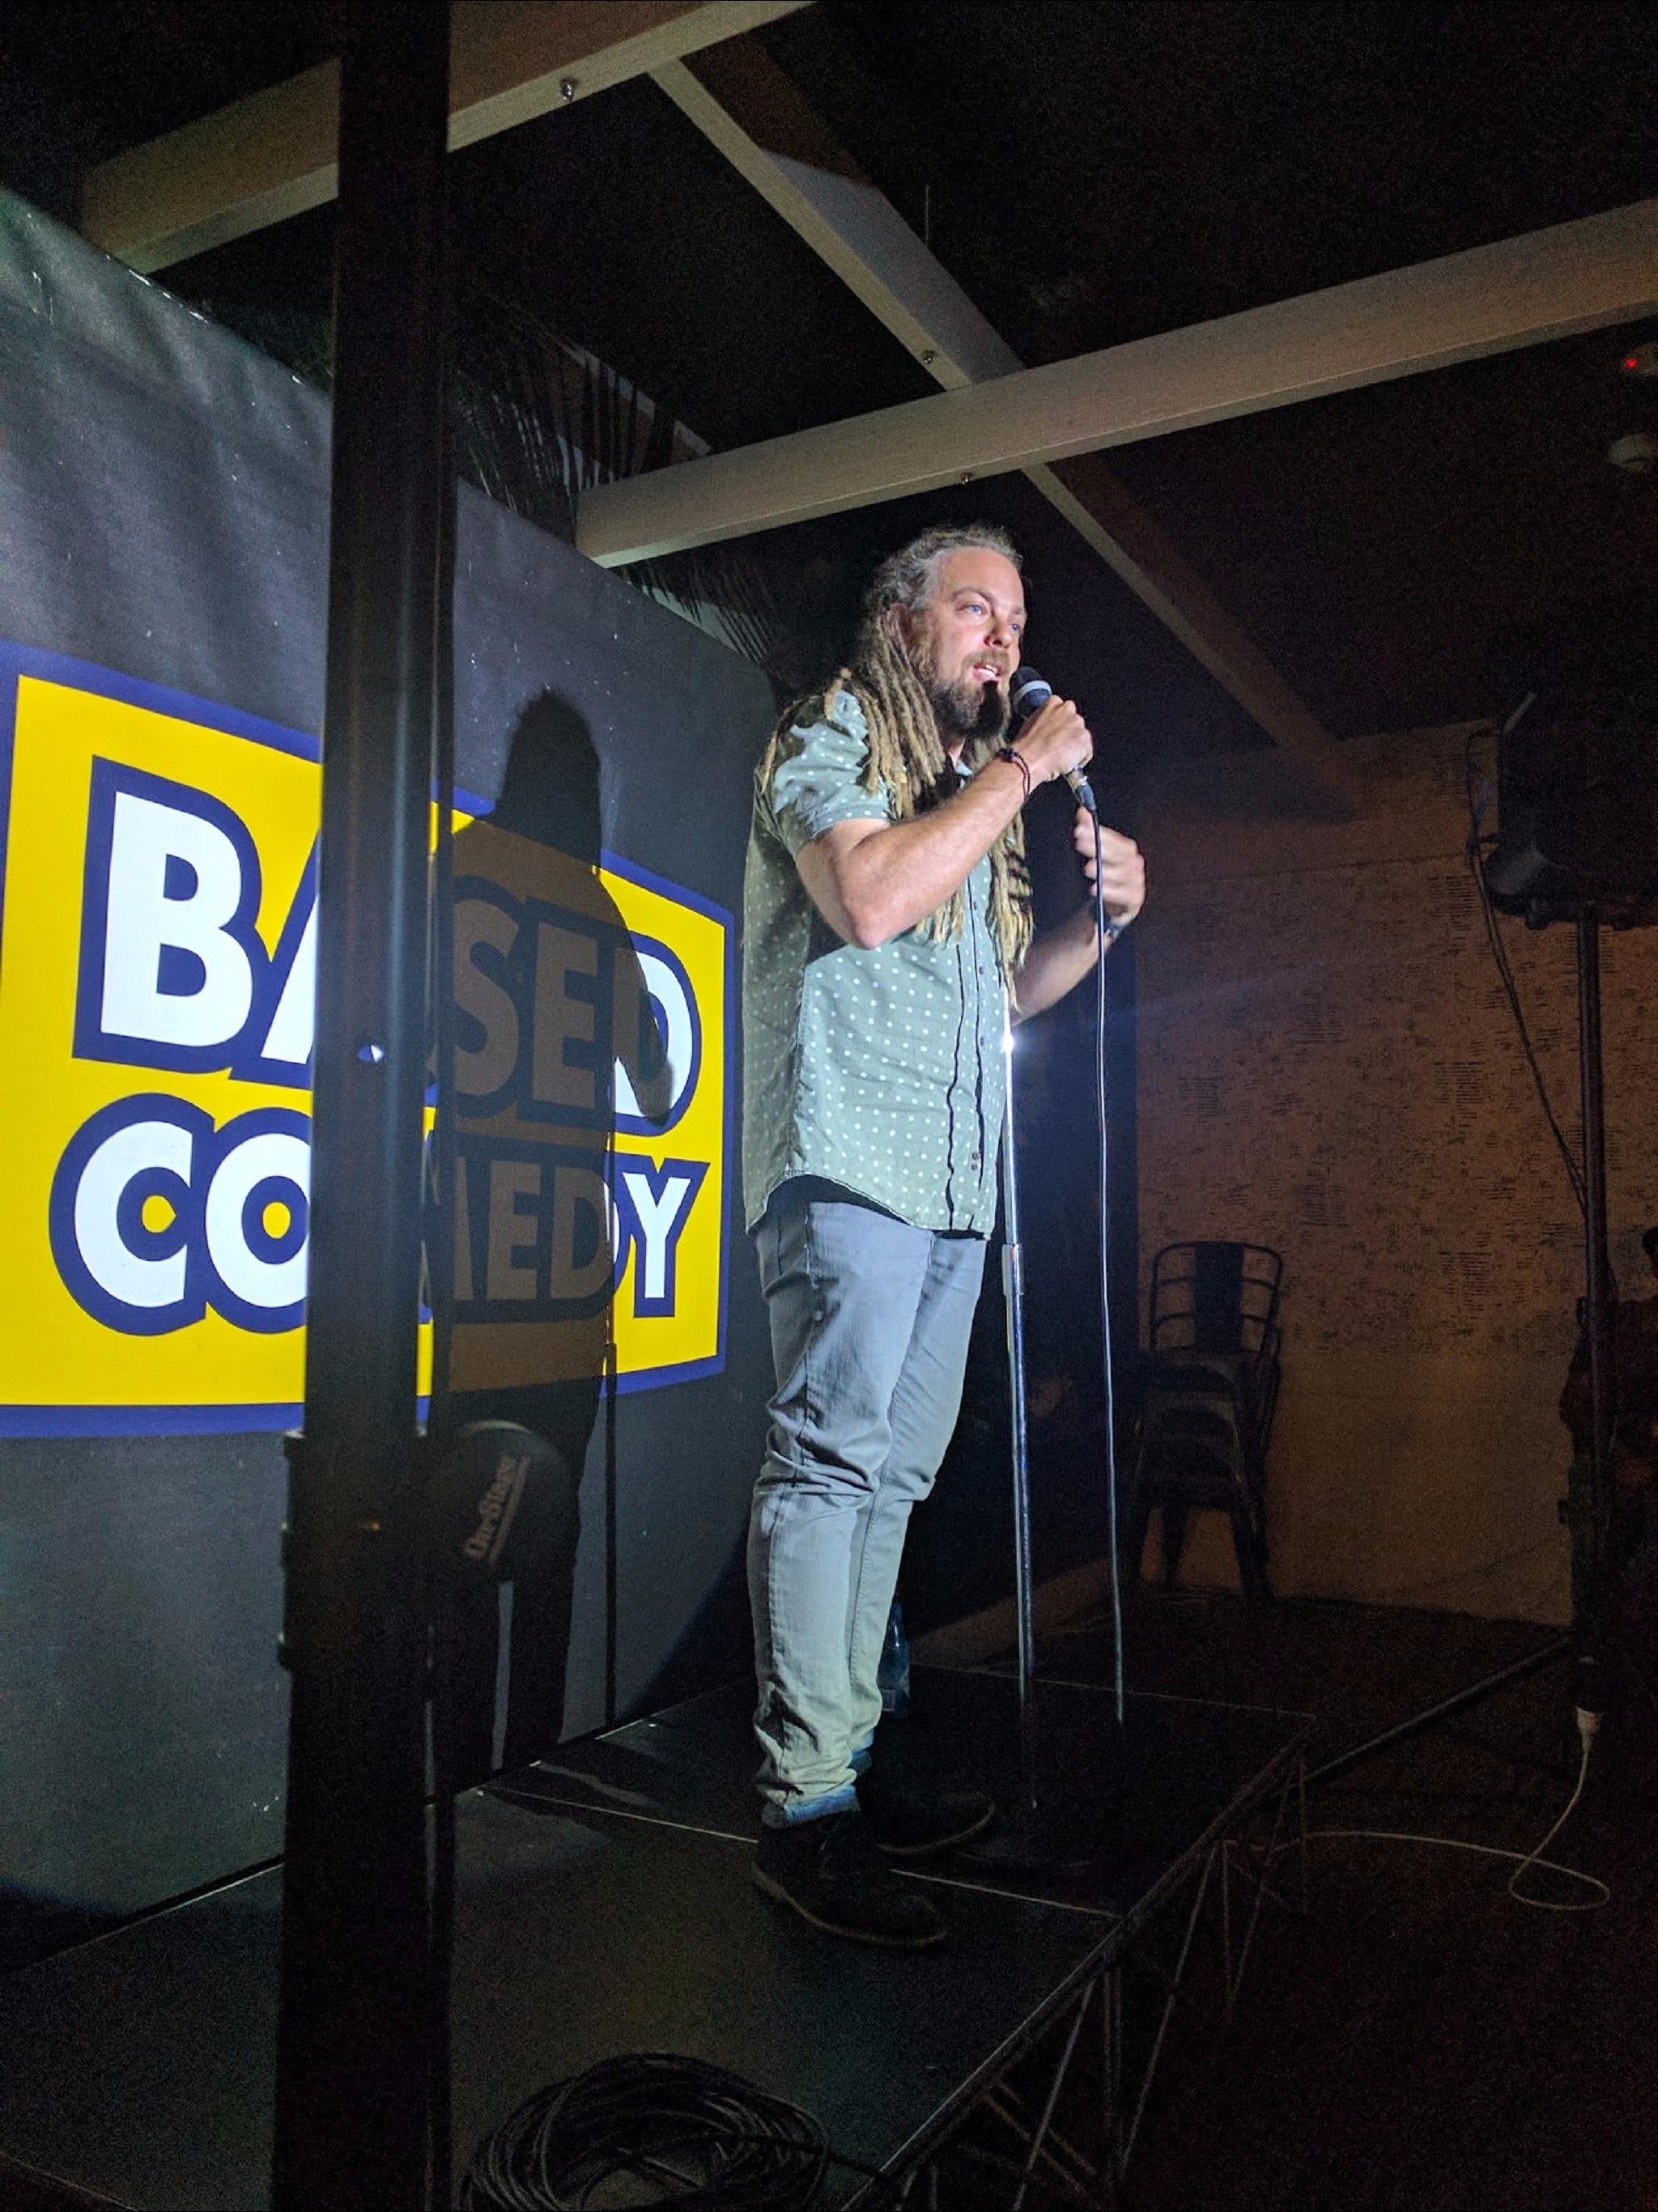 Based Comedy at The Palm Beach Hotel - Melbourne Tourism